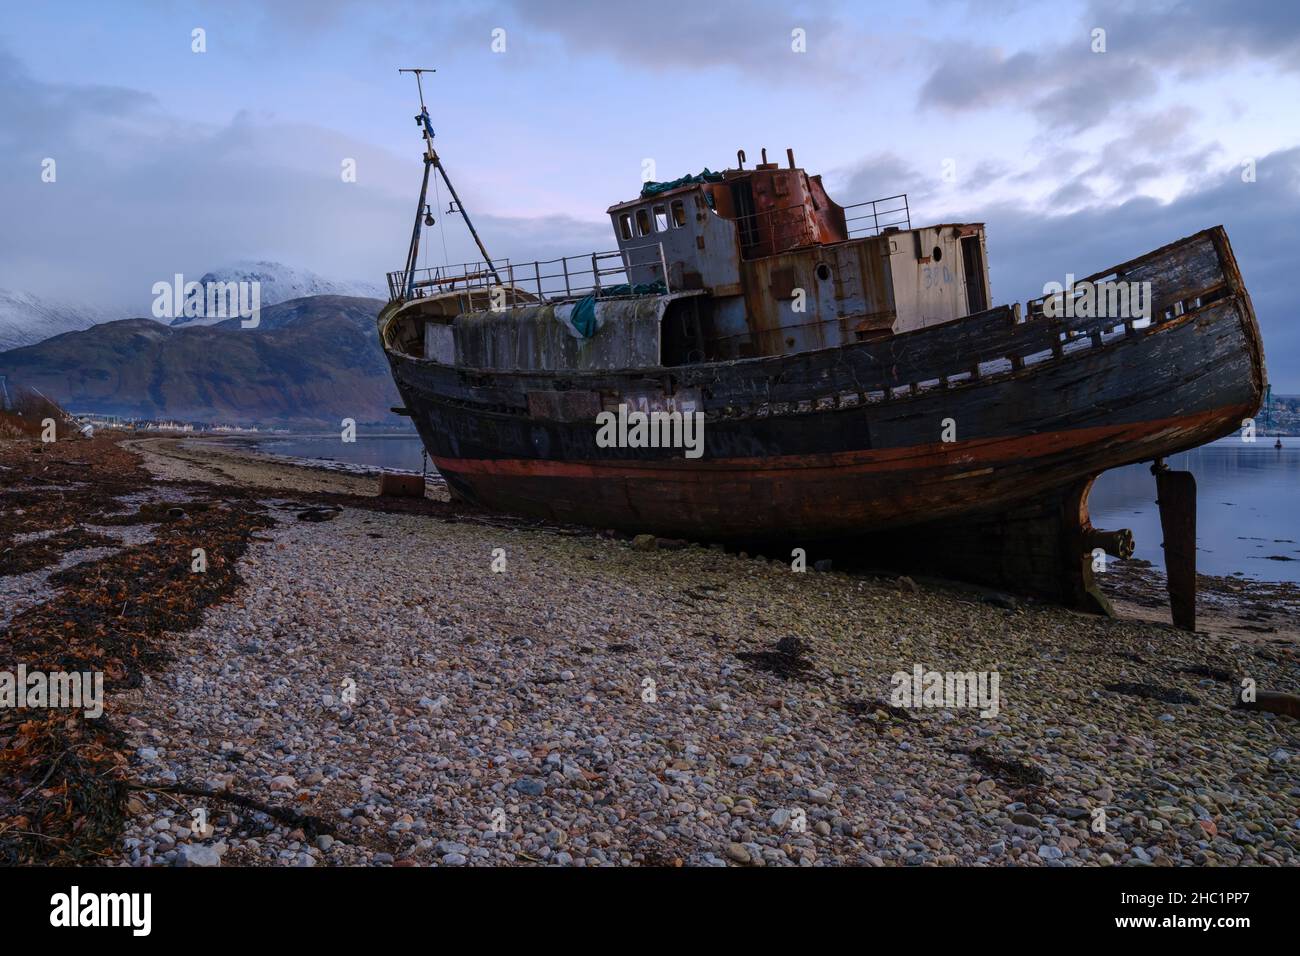 The Corpach Shipwreck, also known as the Old boat of Caol at Loch Eil near Fort William, Scotland, with the snow covered BenNevis in the background. Stock Photo